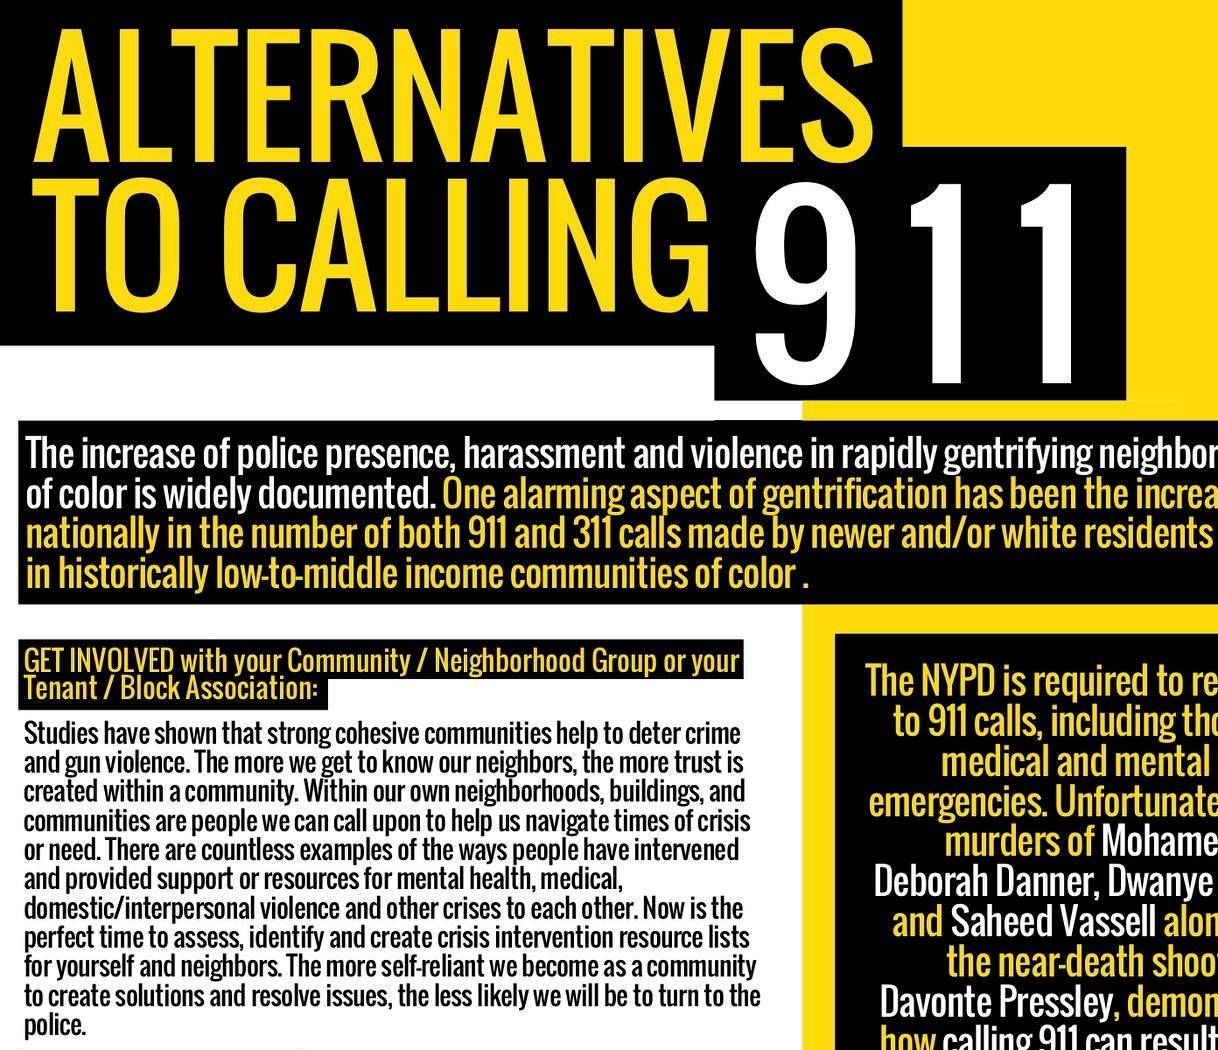 Don't Call The Cops: Equality for Flatbush's Suggestions & Tactics as Alternatives to Calling 911